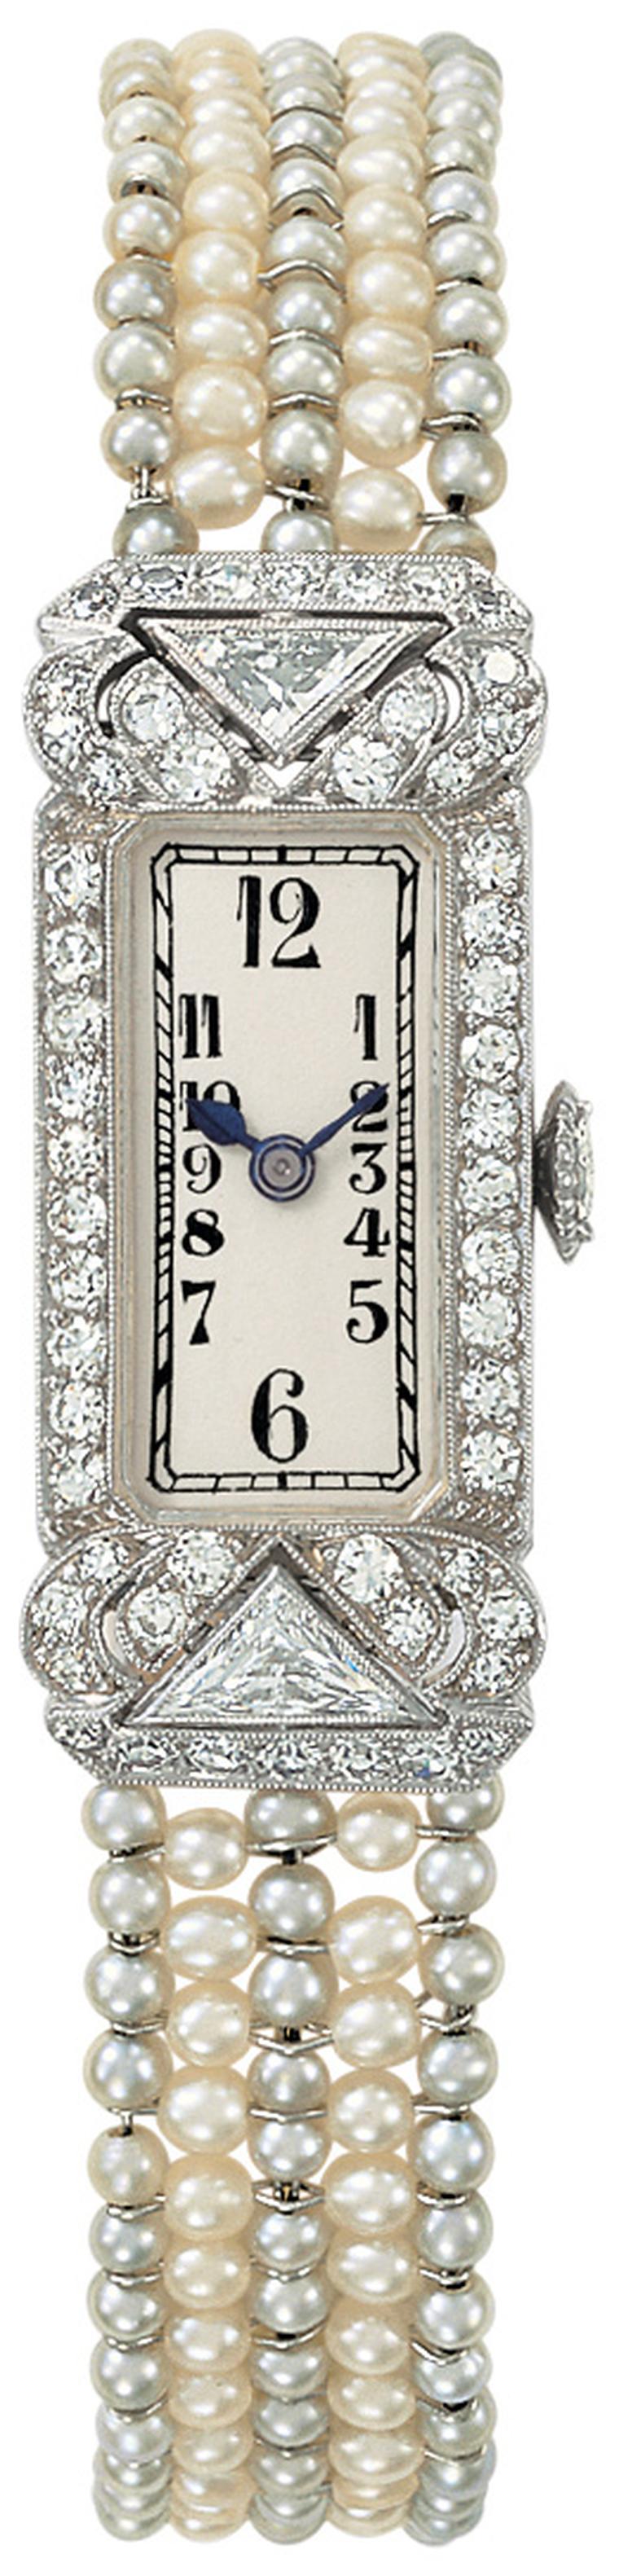 Patek-Philippe-P0641_a_100_collection_1925-40